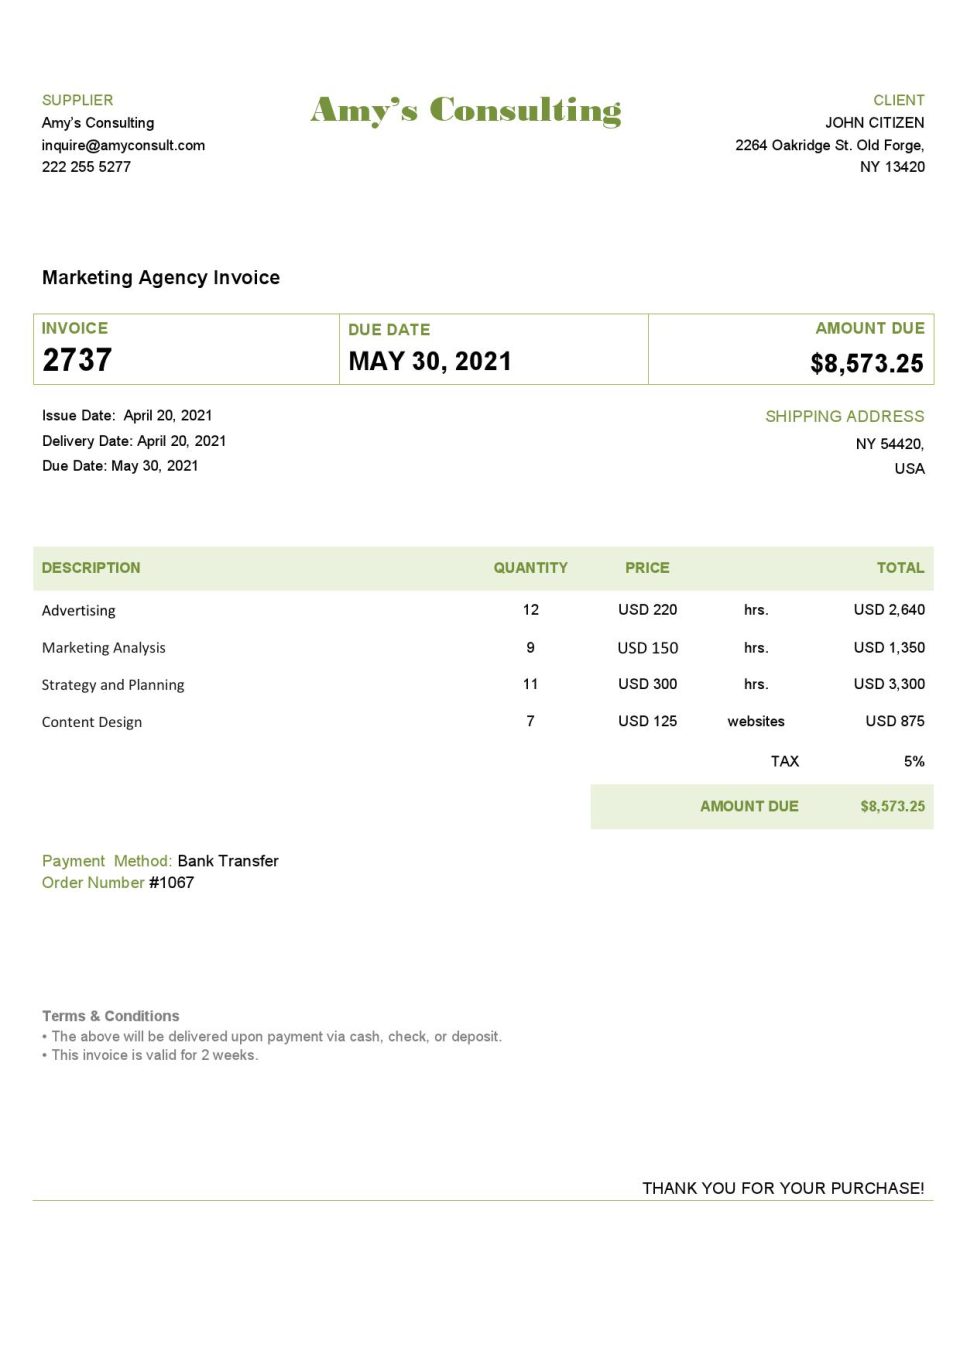 High-Quality USA Amy’s Consulting Invoice Template PDF | Fully Editable